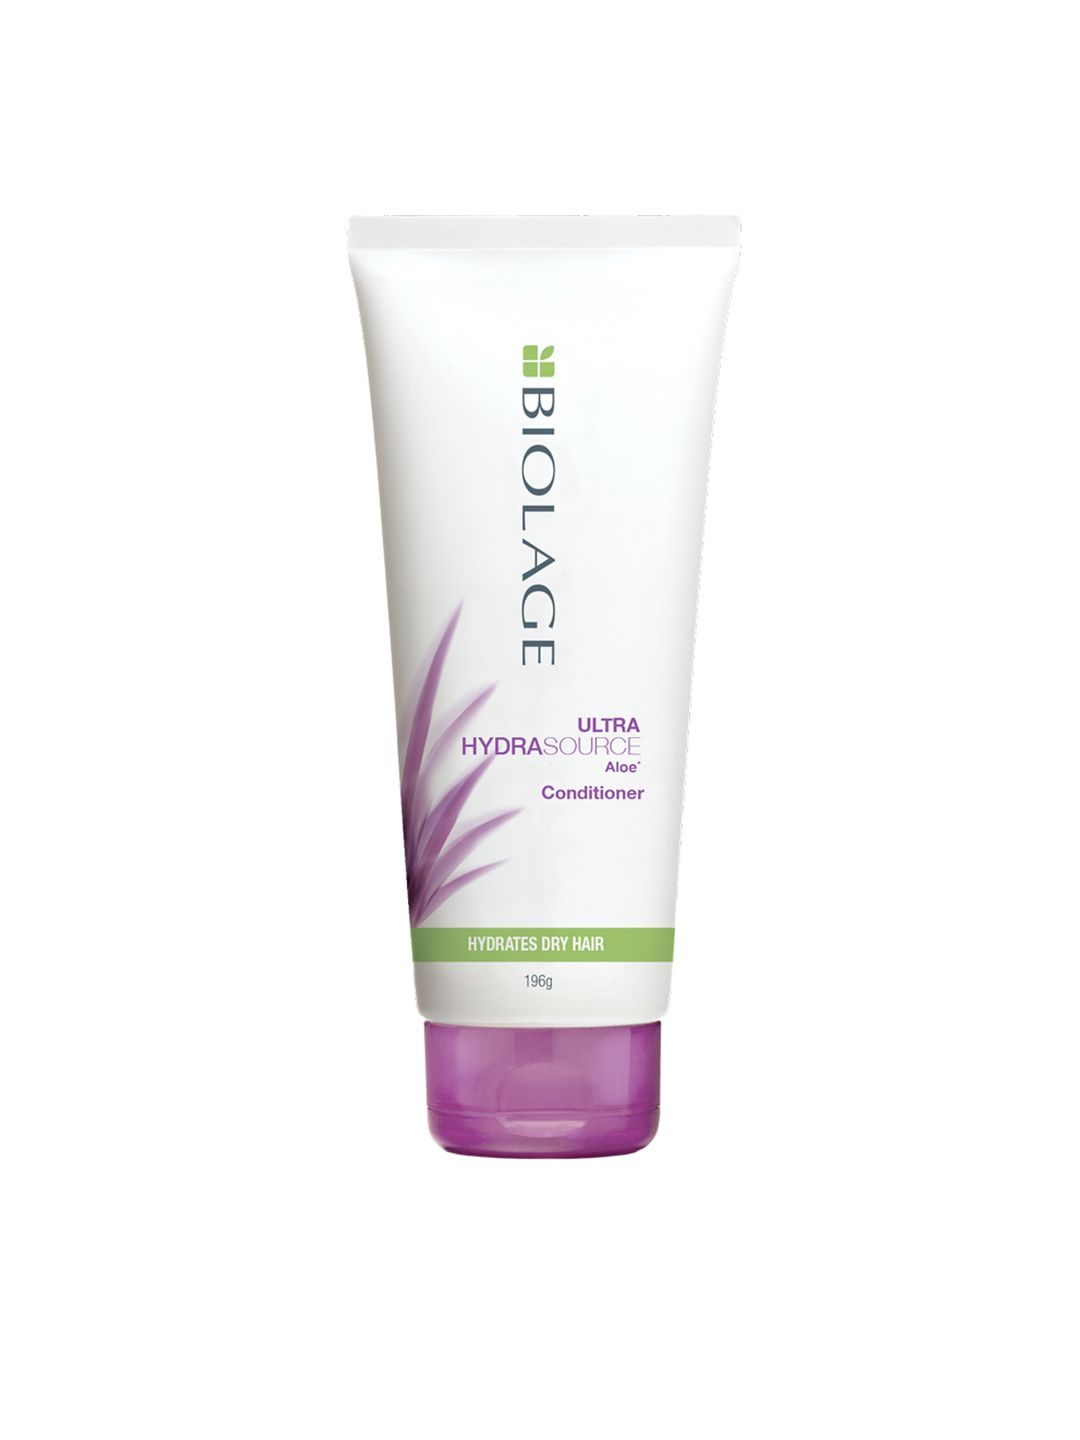 Biolage Ultra Hydra Source Aloe Conditioner for Hydration - 196 g Price in India